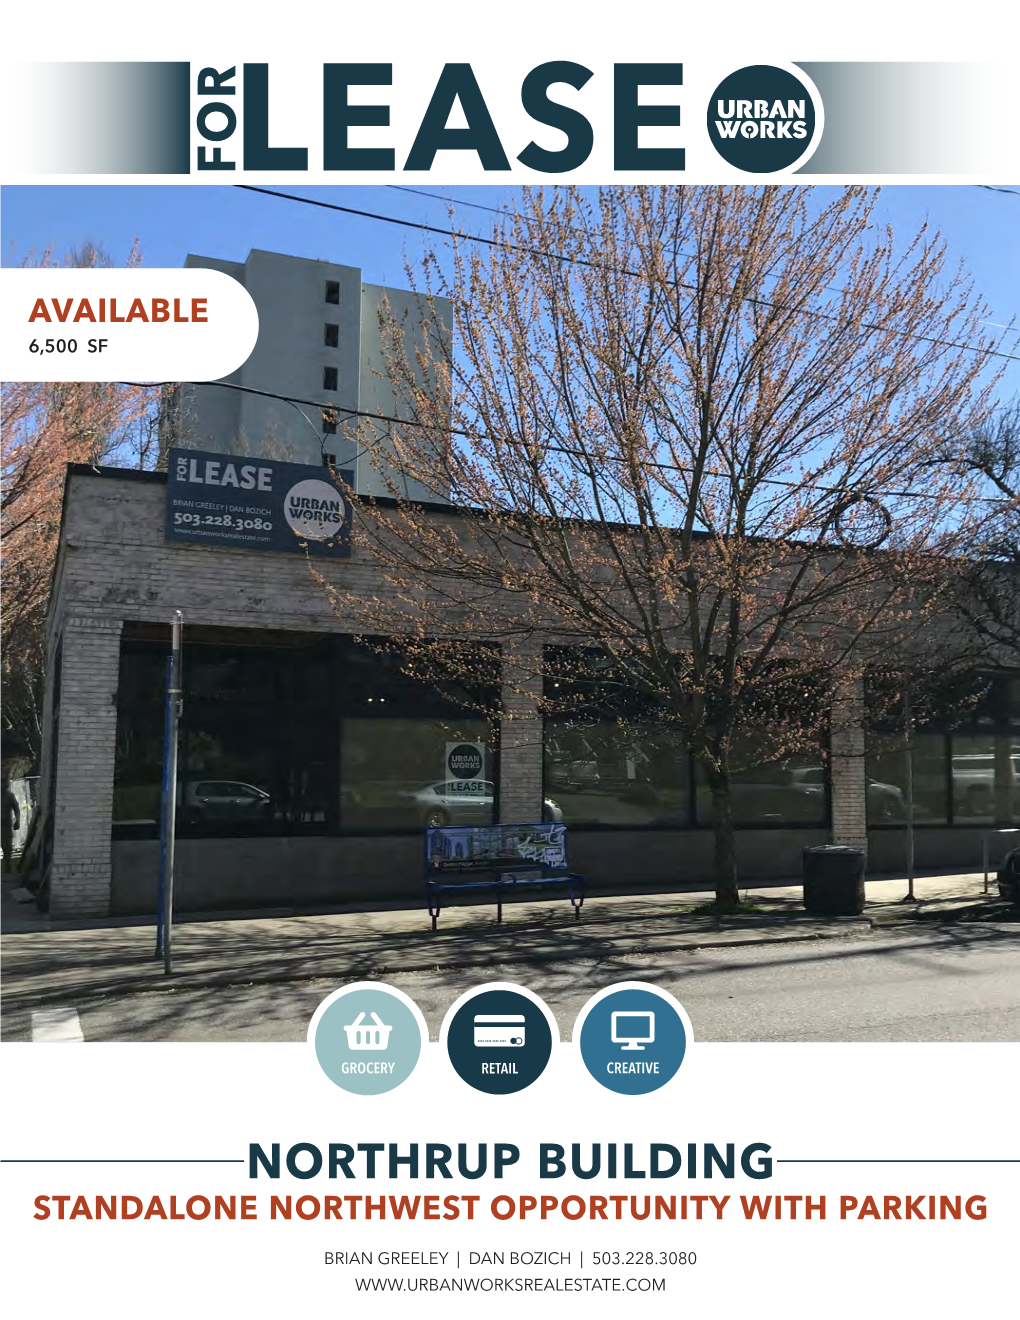 Northrup Building Standalone Northwest Opportunity with Parking